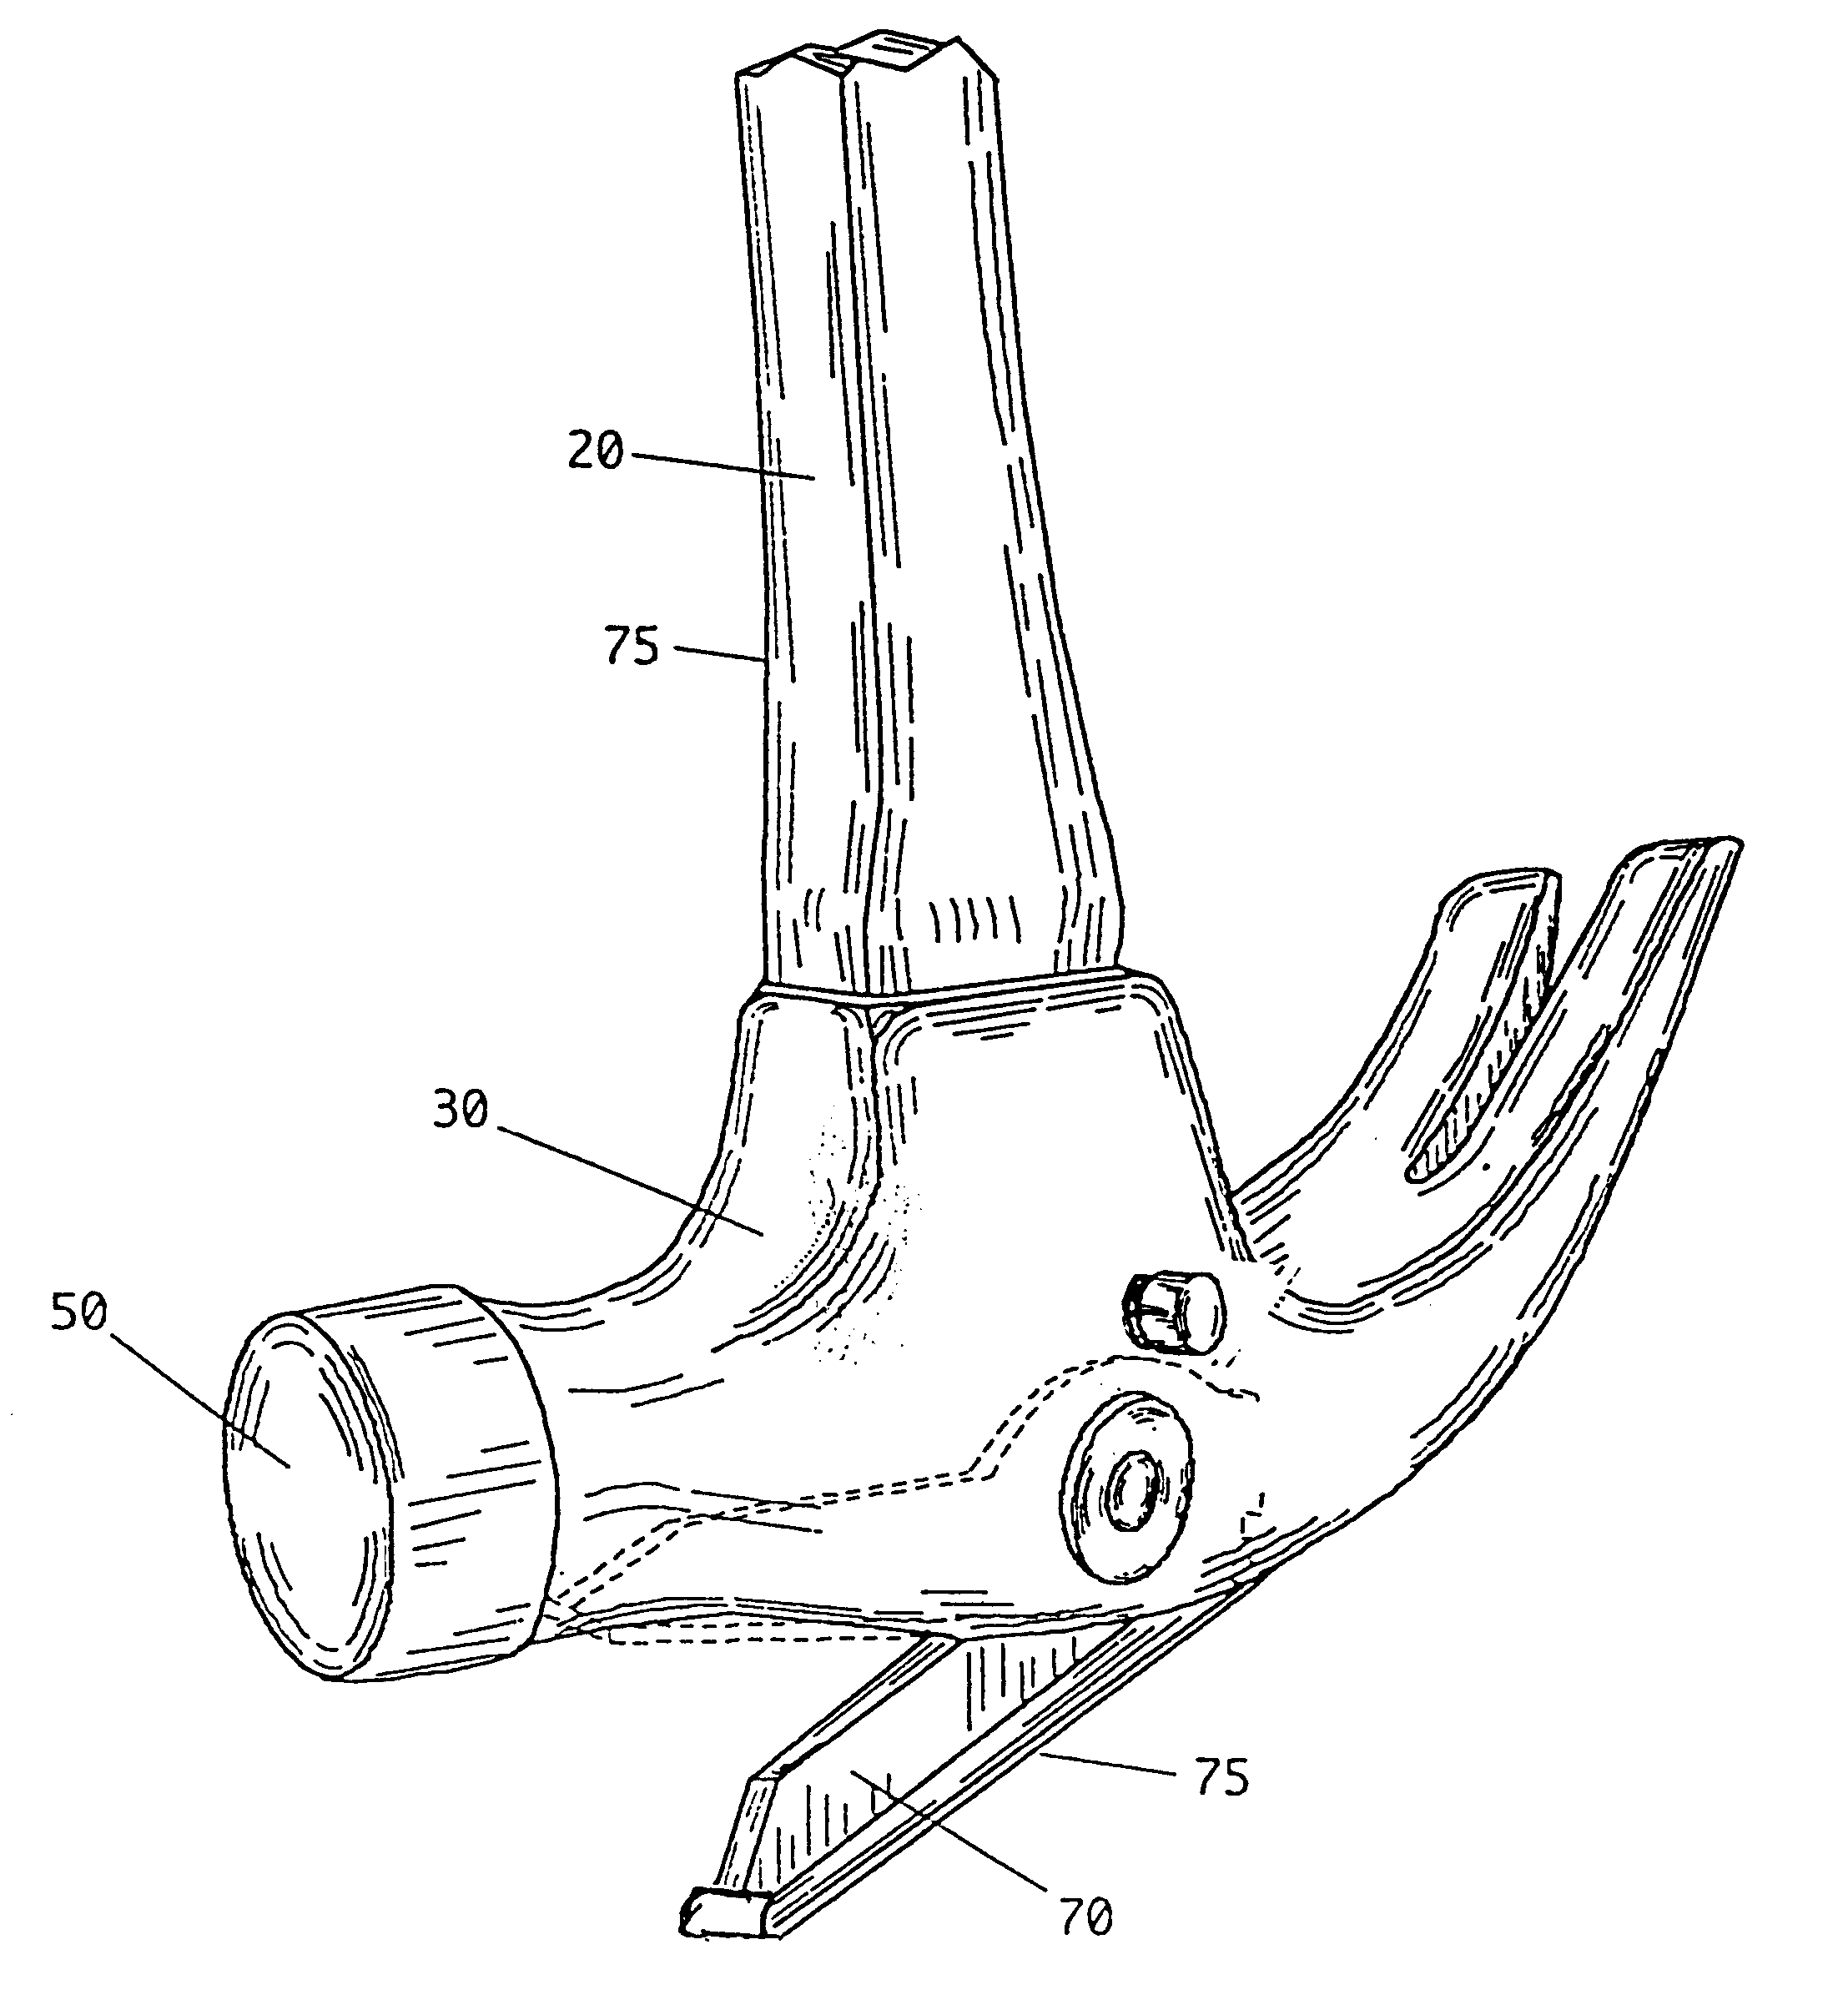 Hammer with integral lever mechanism